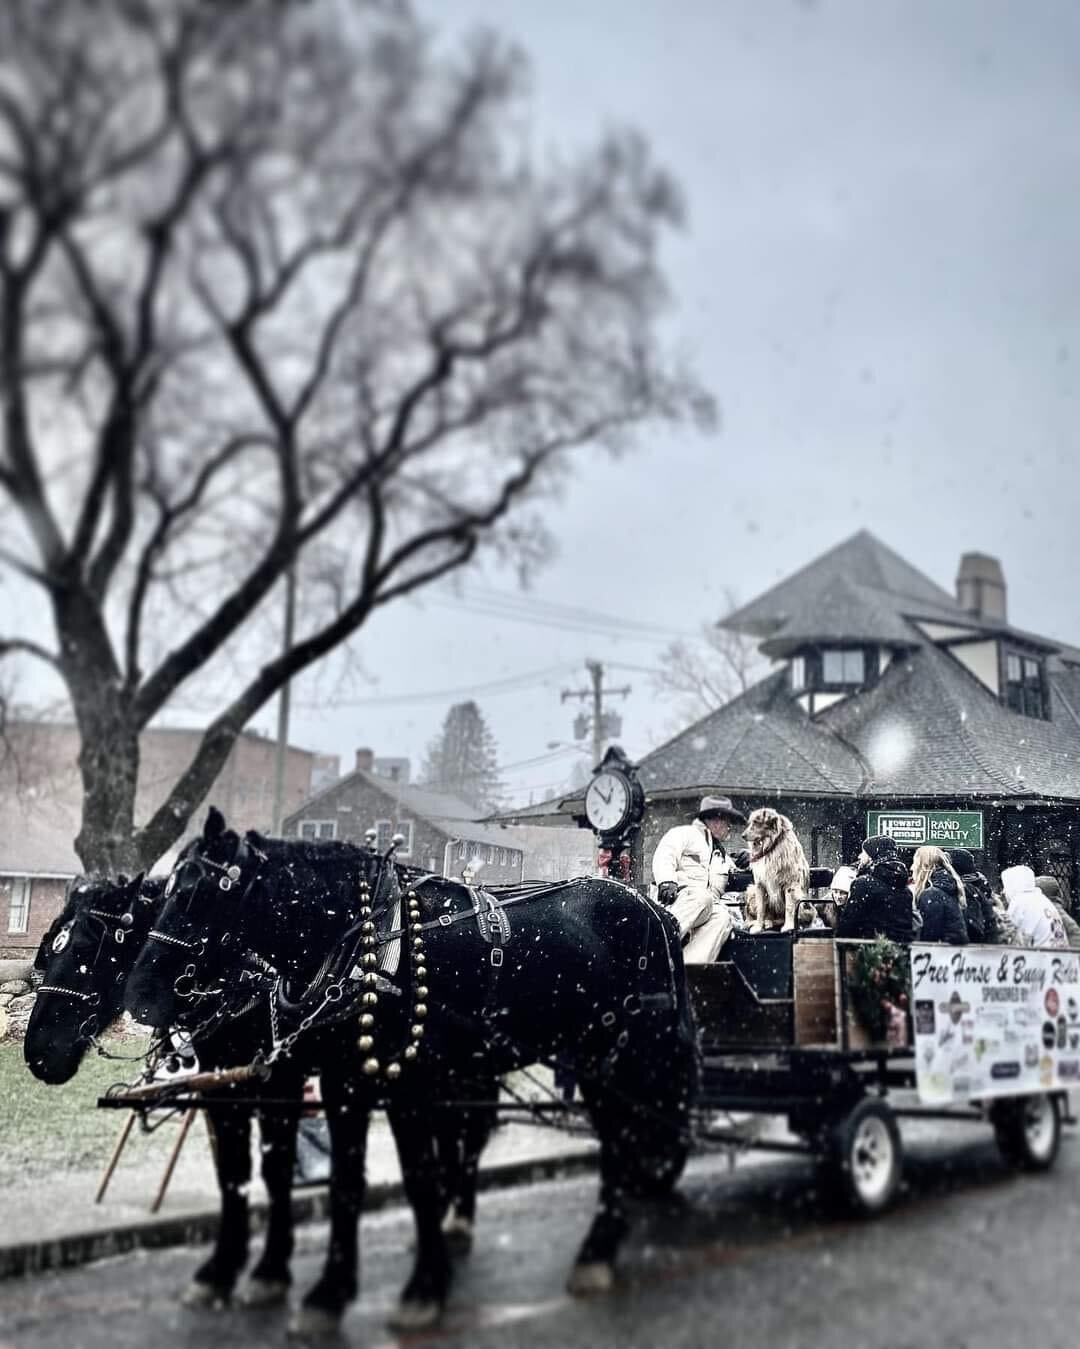 Free Horse &amp; Buggy rides have begun in Warwick, NY&hellip;weekends through mid-December, 11am-4pm. Hop on at the Railroad Green stop&hellip;weather dependent.

p h o t o s Warwick Home For The Holidays